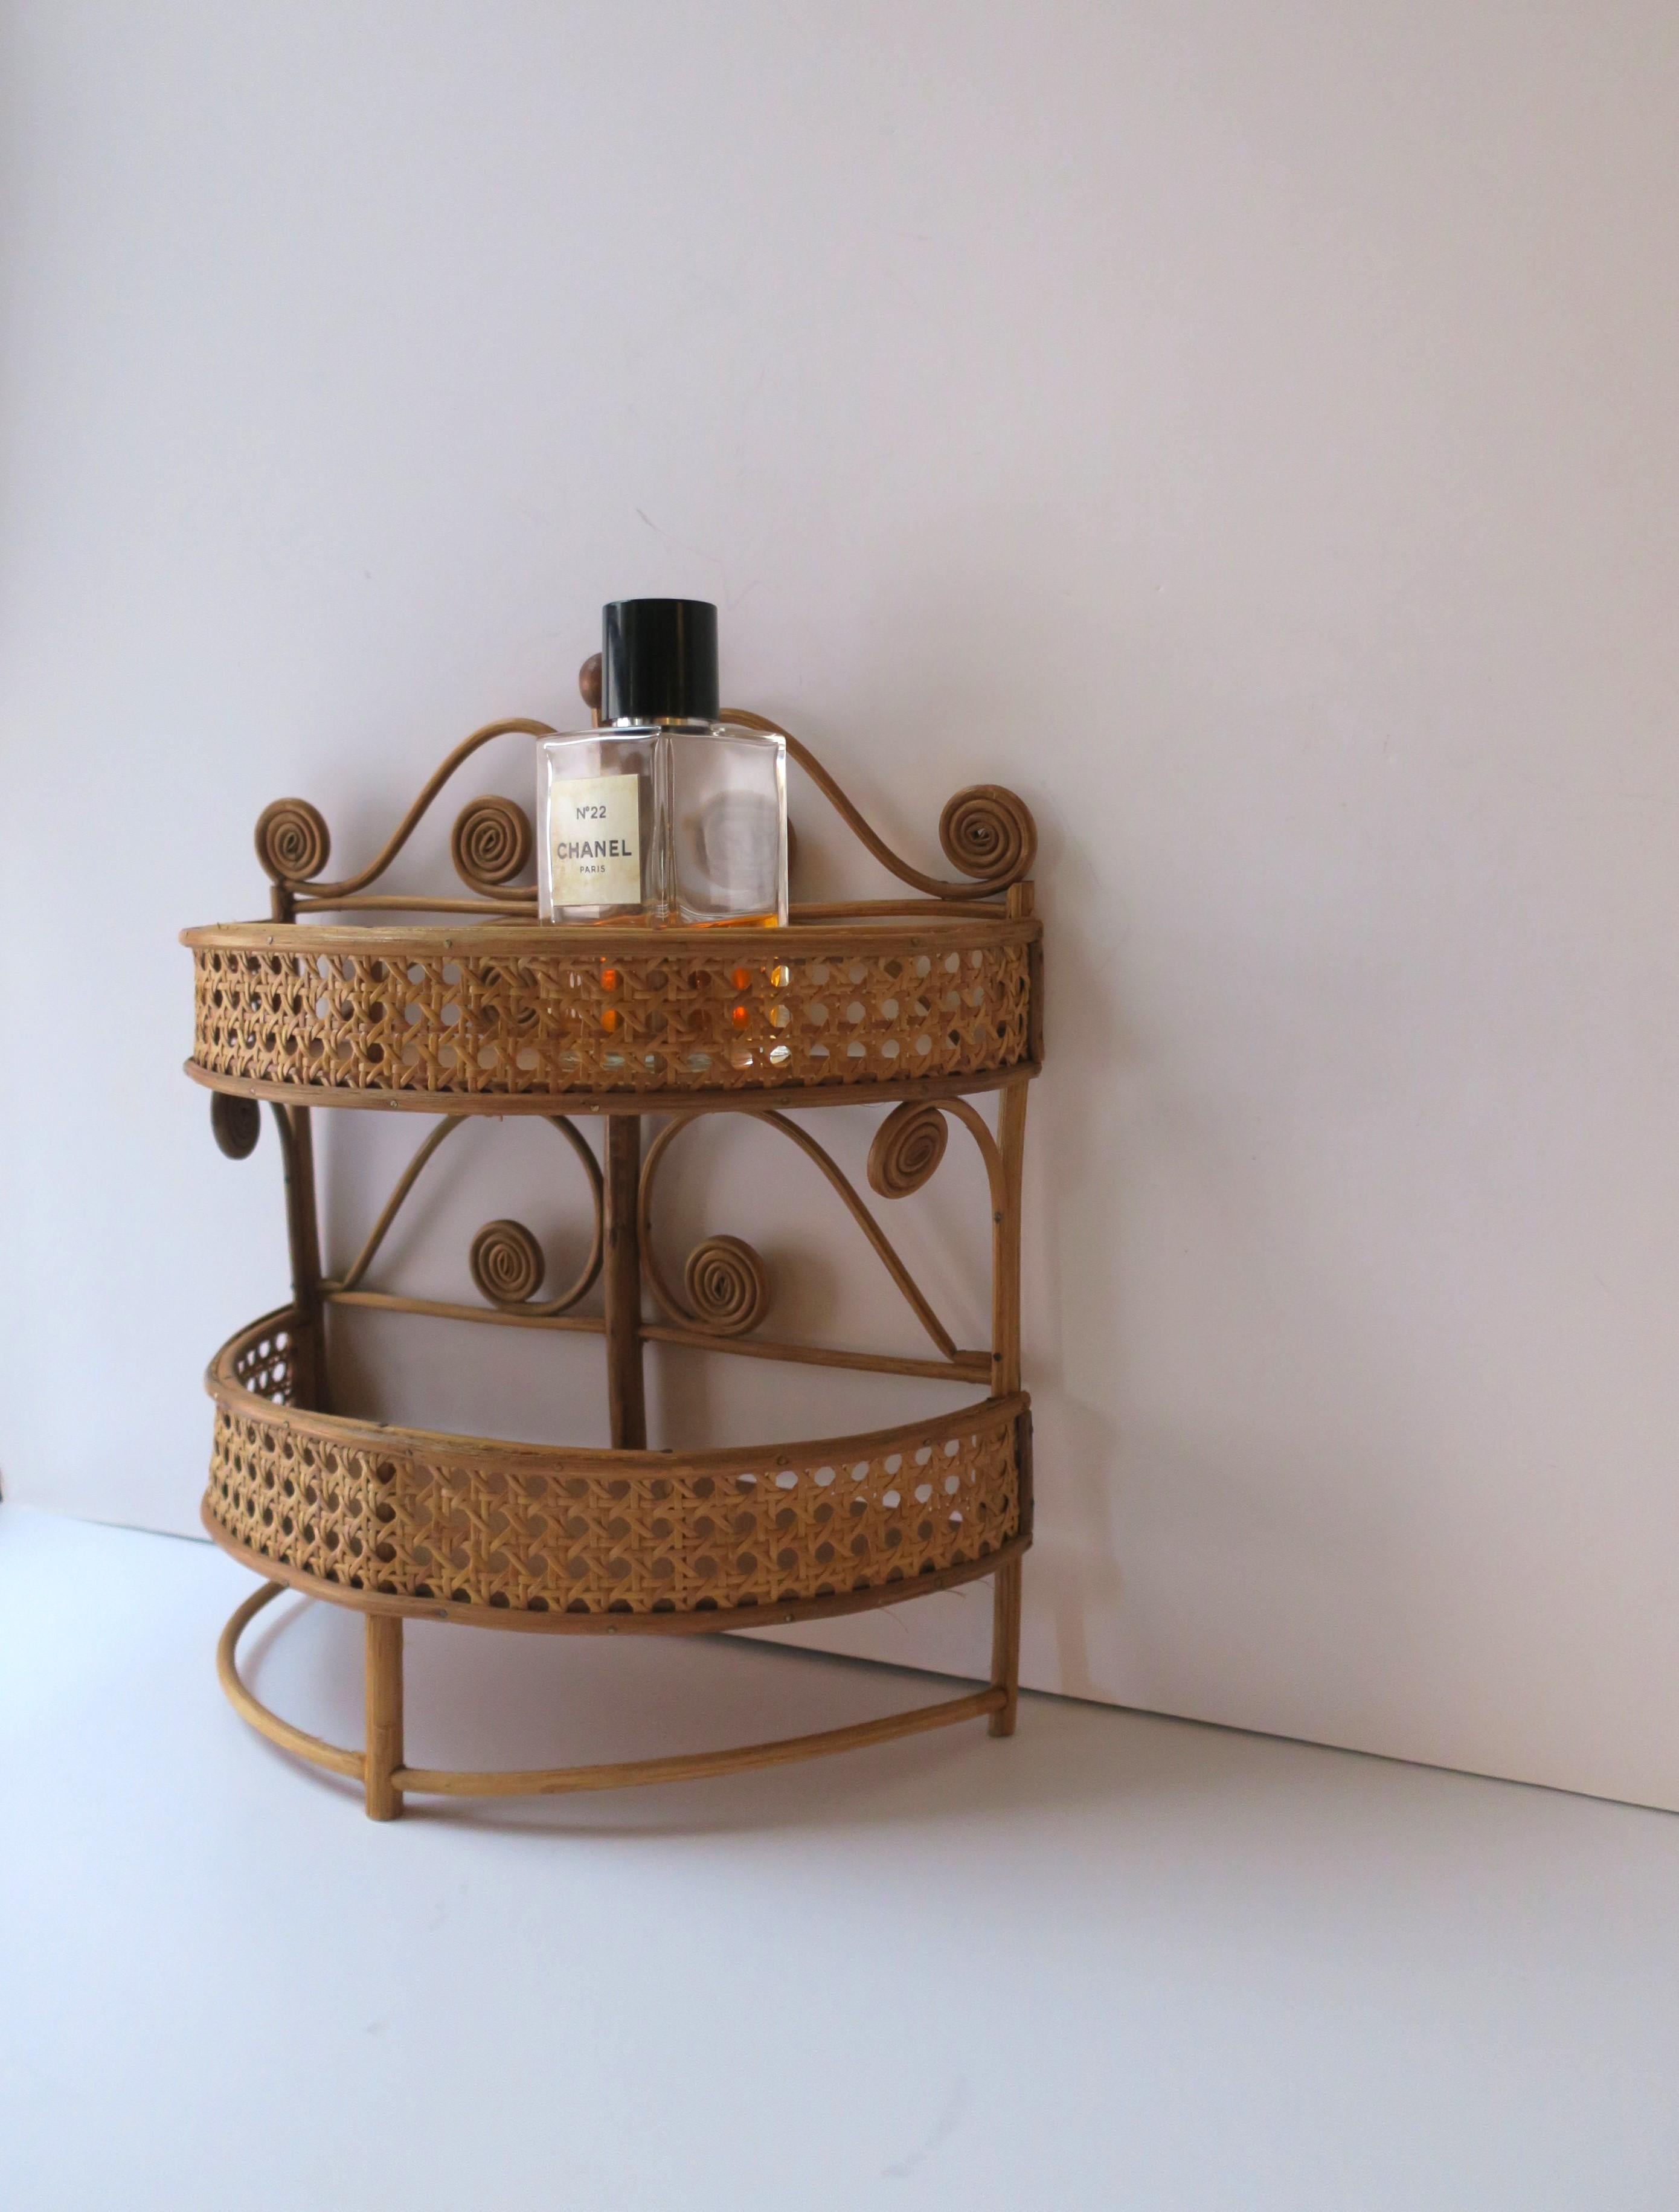 Wicker and Cane Wall Shelf In Good Condition For Sale In New York, NY